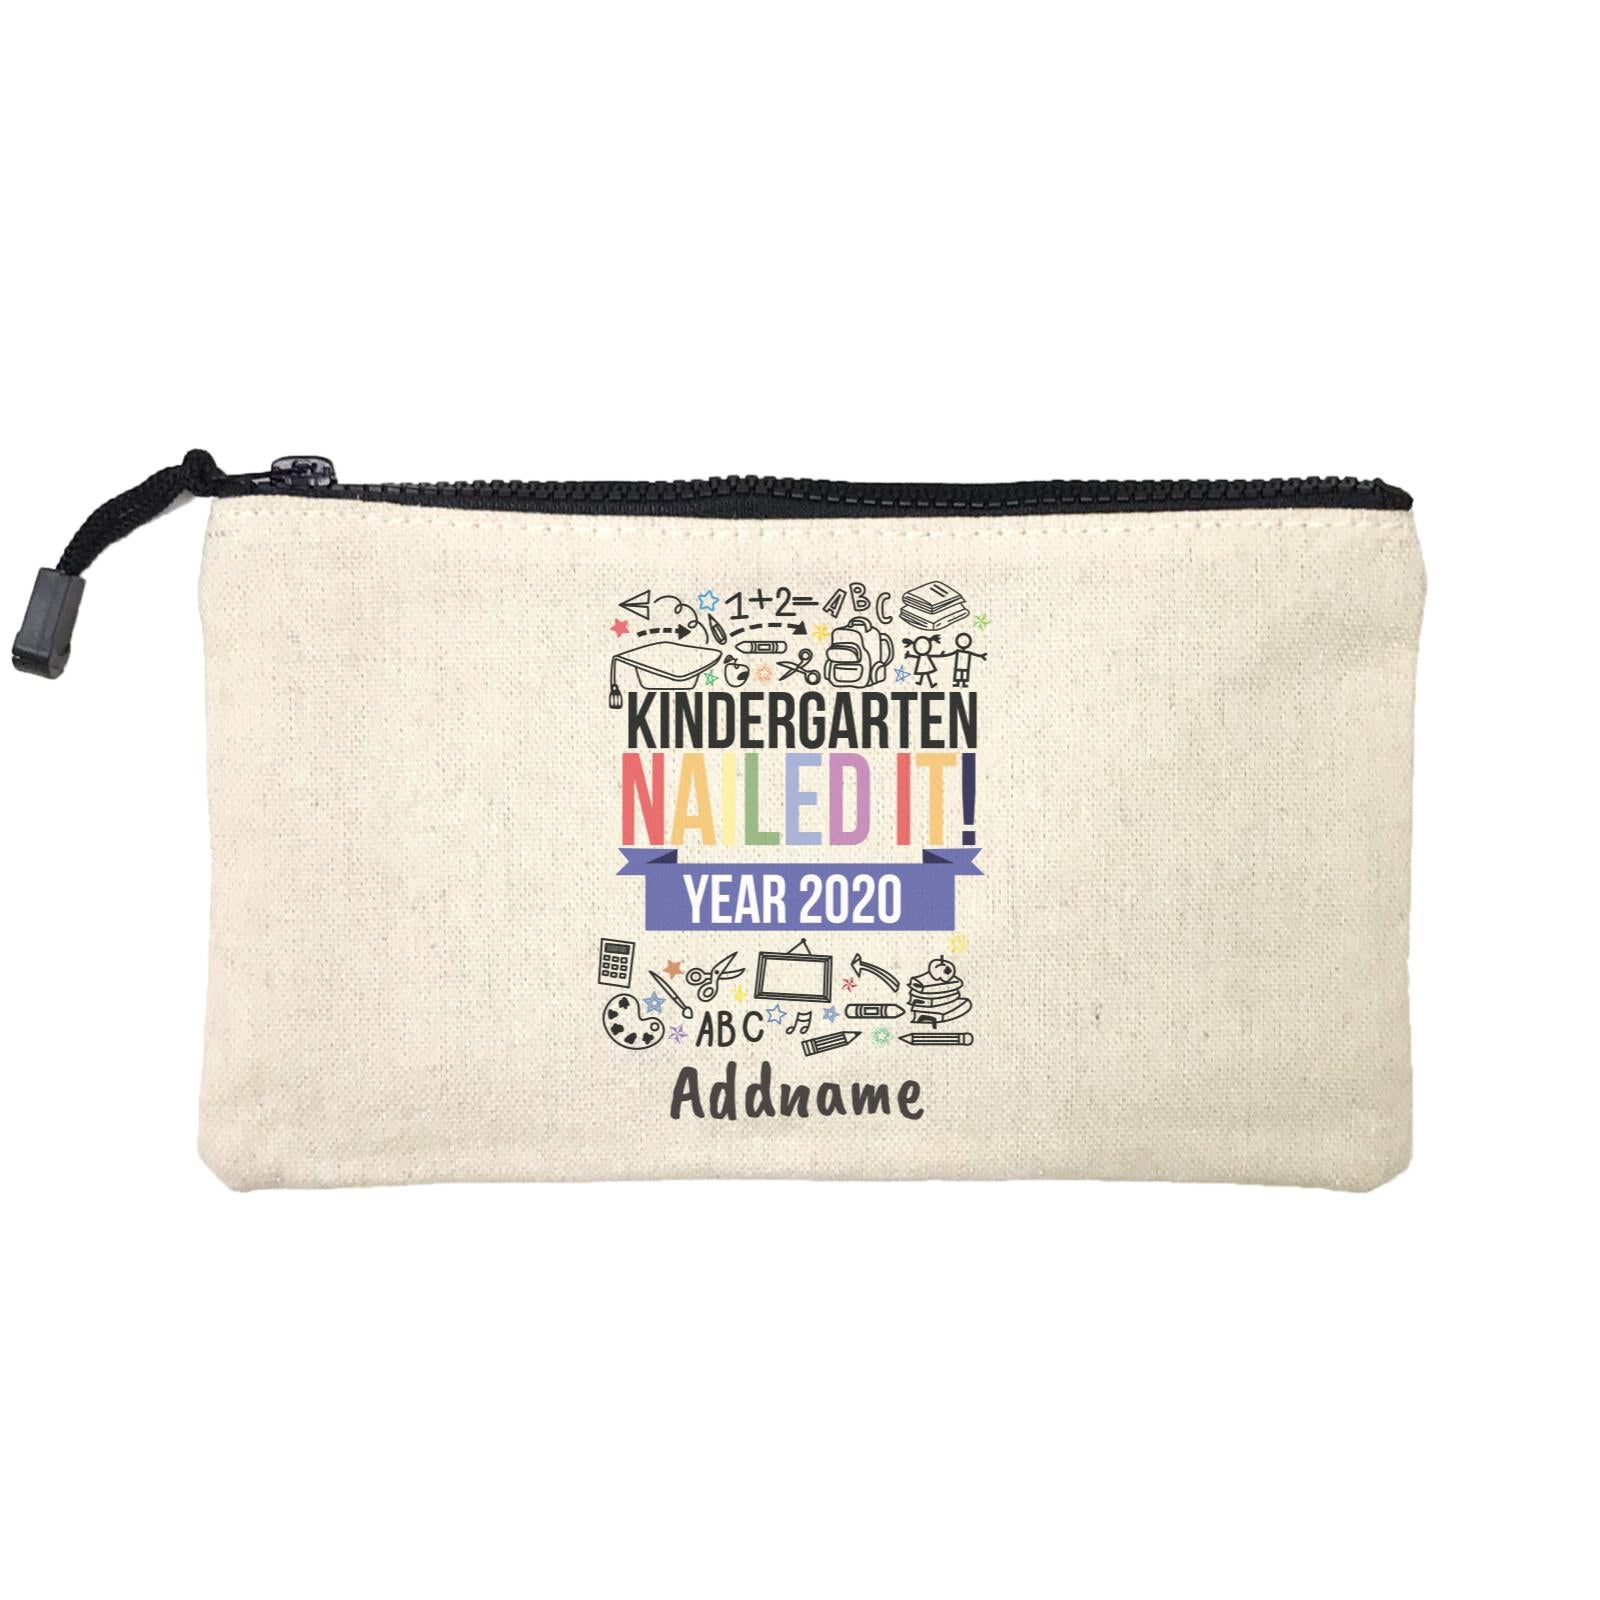 Graduation Series Kindergarten Nailed It Mini Accessories Stationery Pouch